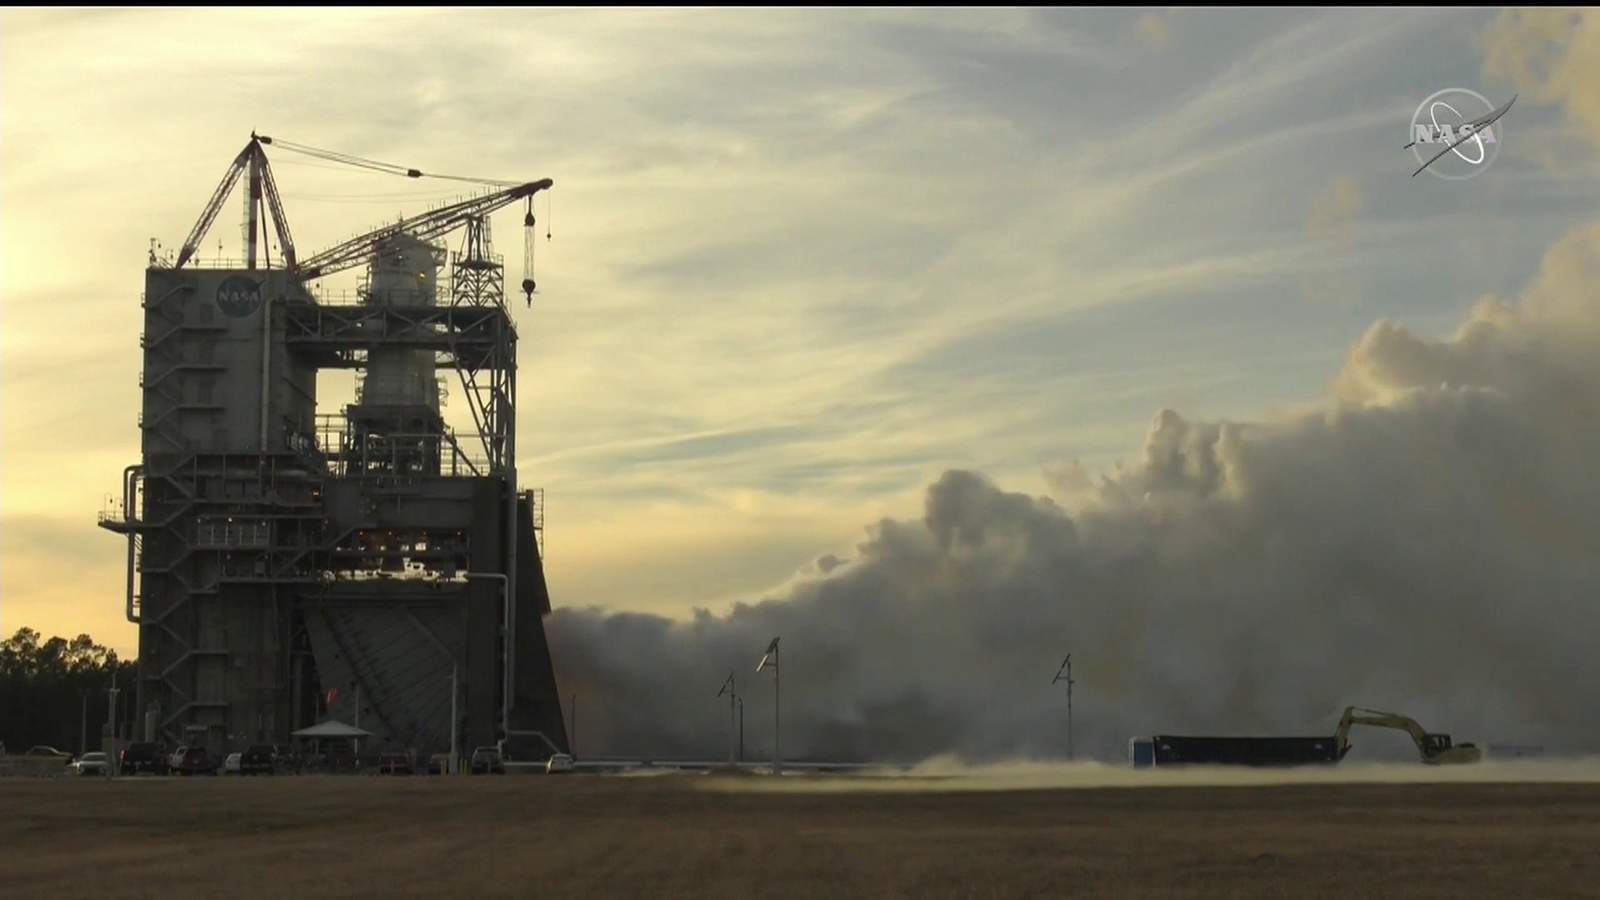 NASA begins new moon rocket engine tests, still evaluating if another Green Run test will happen